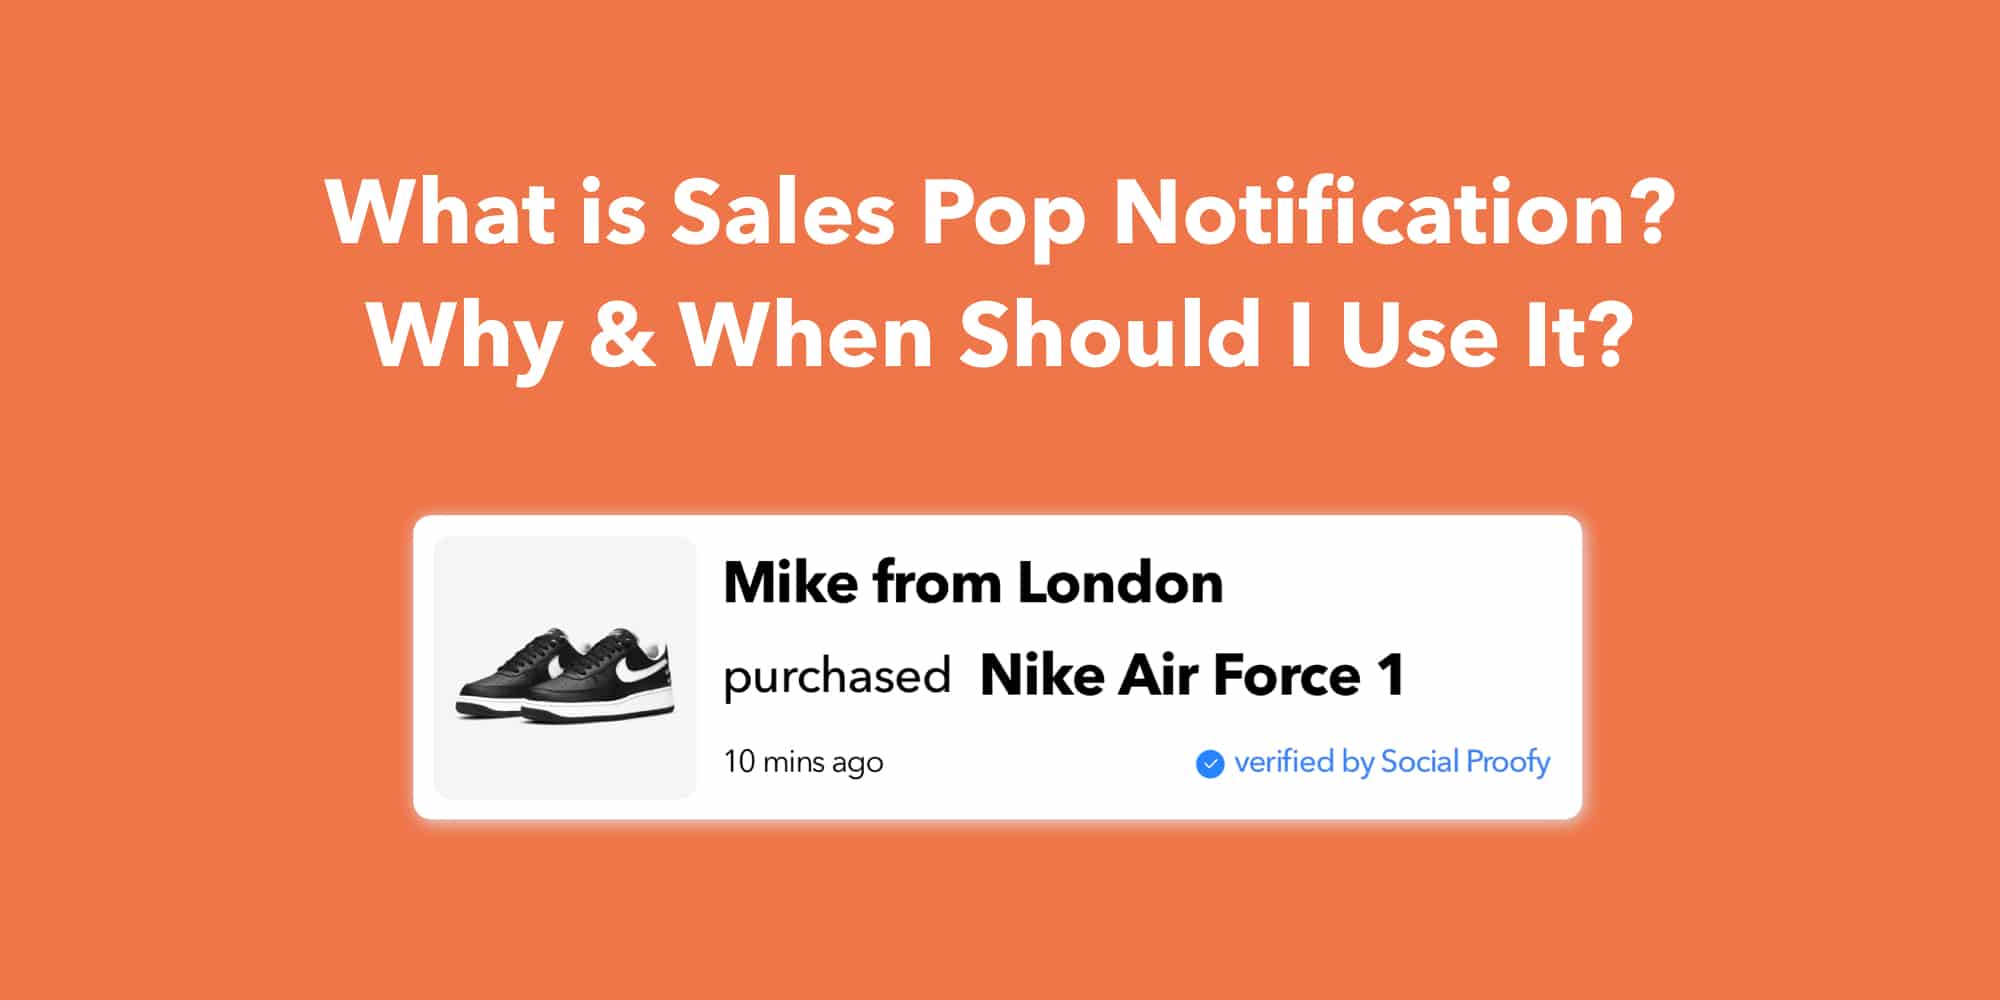 What is Sales Pop Notification? Why & When Should I Use It?